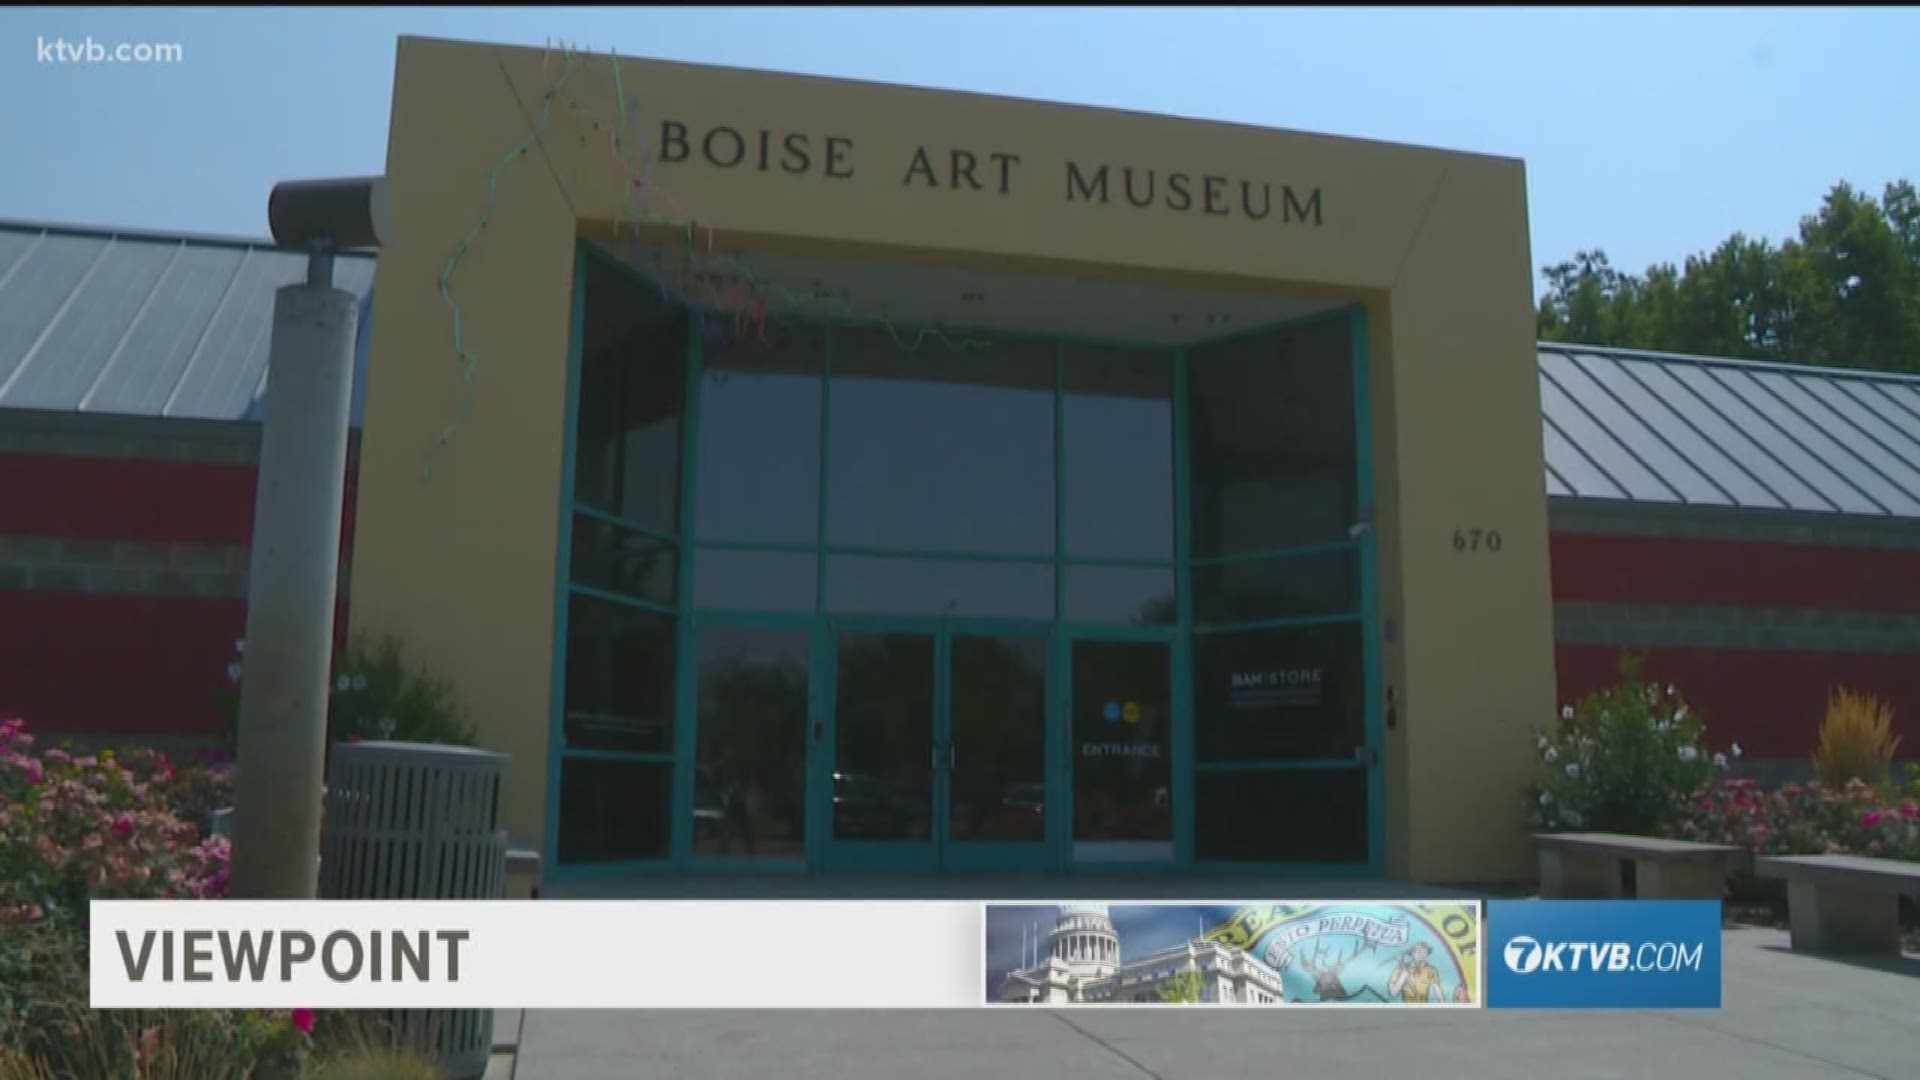 We're continuing our late summer look at Idaho's amazing arts scene on Viewpoint. In this episode, we focus on the Boise Philharmonic and the Boise Art Museum. 
The orchestra is getting ready for its ambitious new season, and BAM has a new exhibit called 